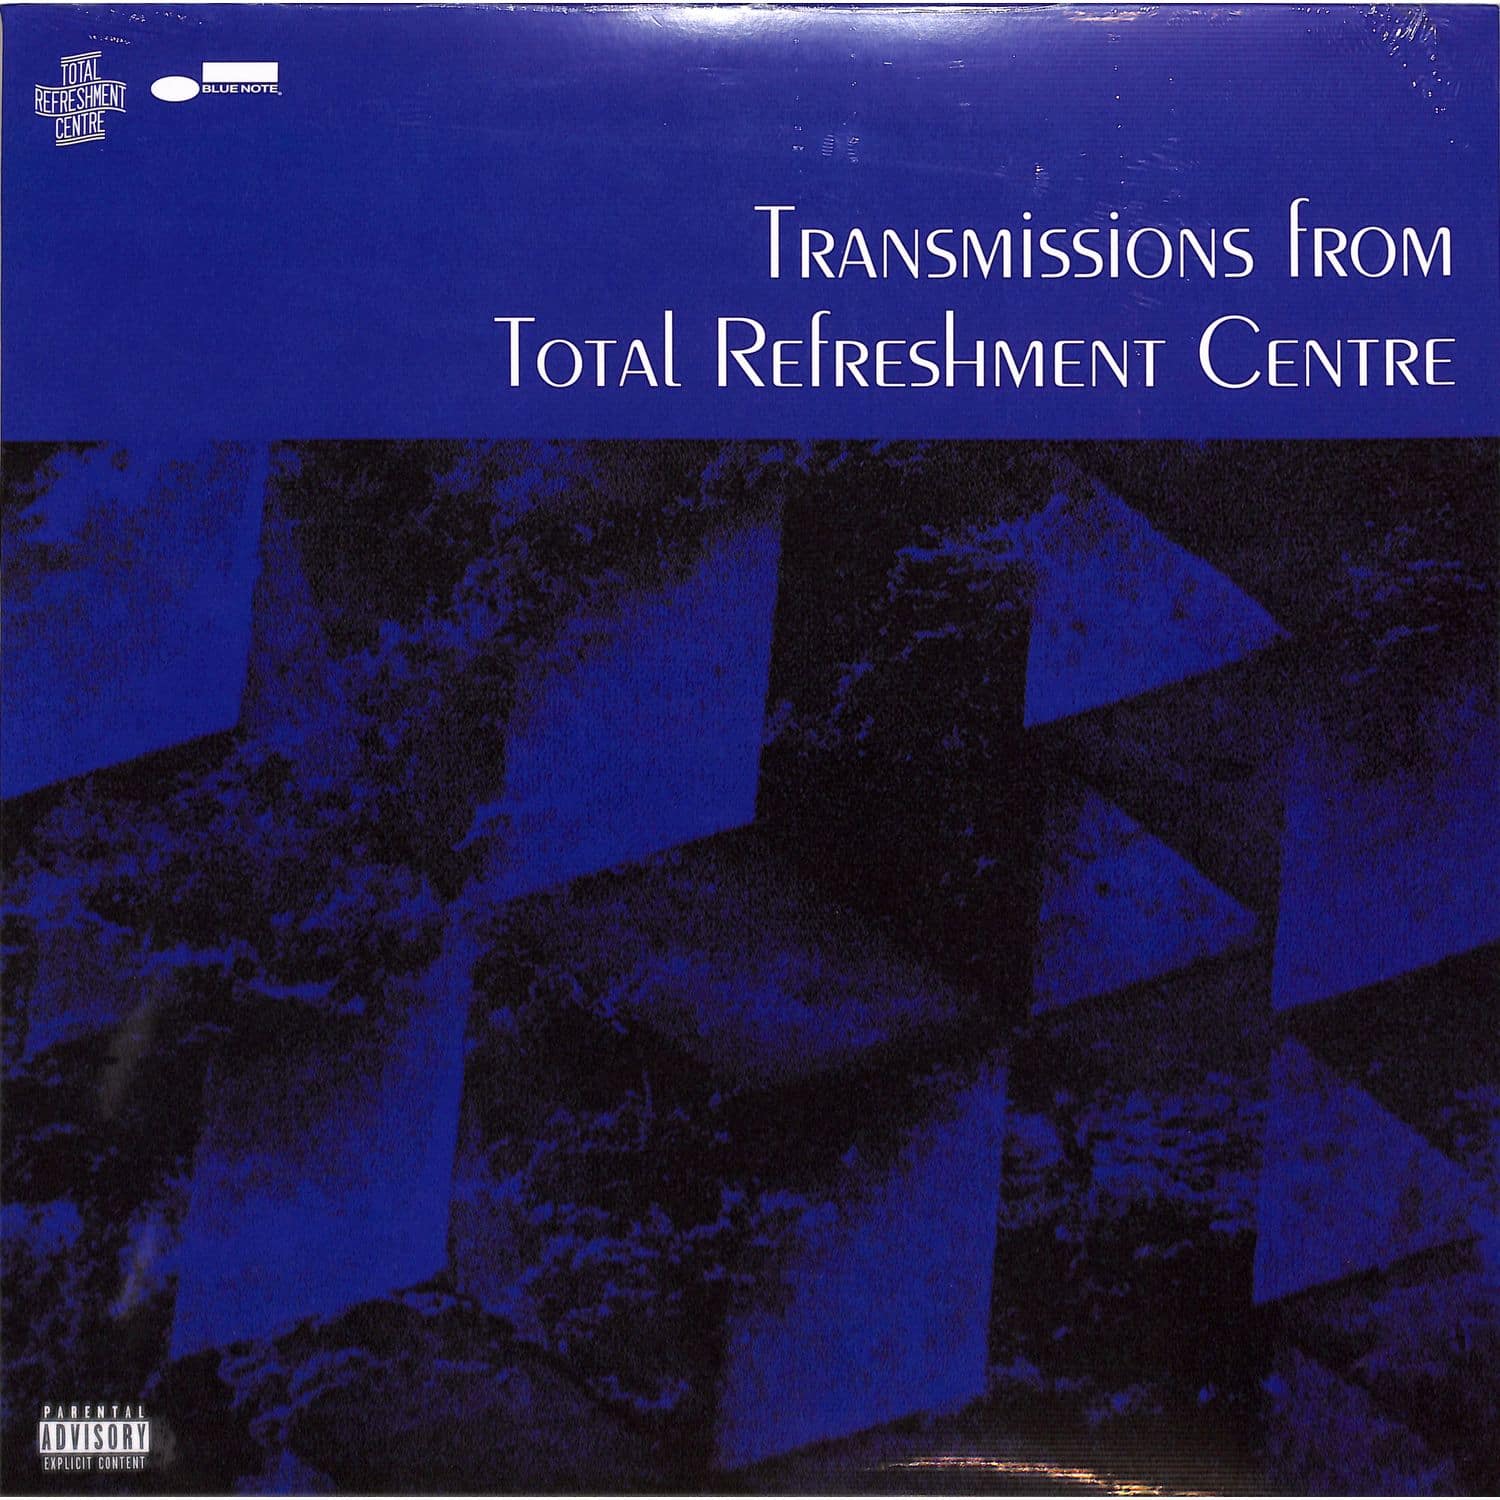 Total Refreshment Centre - TRANSMISSIONS FROM TOTAL REFRESHMENT CENTRE 